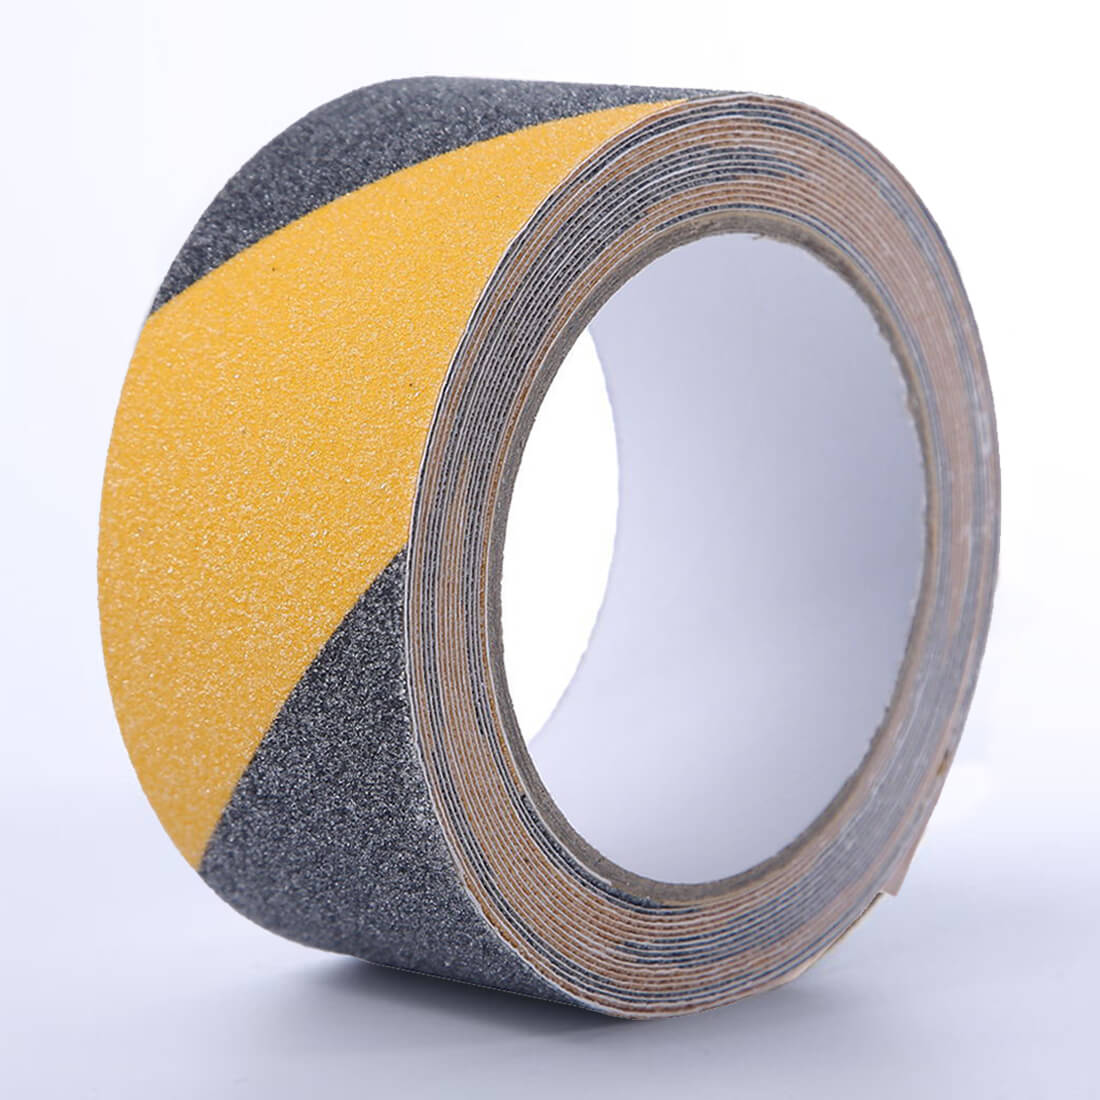 Anti Slip Tape For Stairs - EONBON Tape